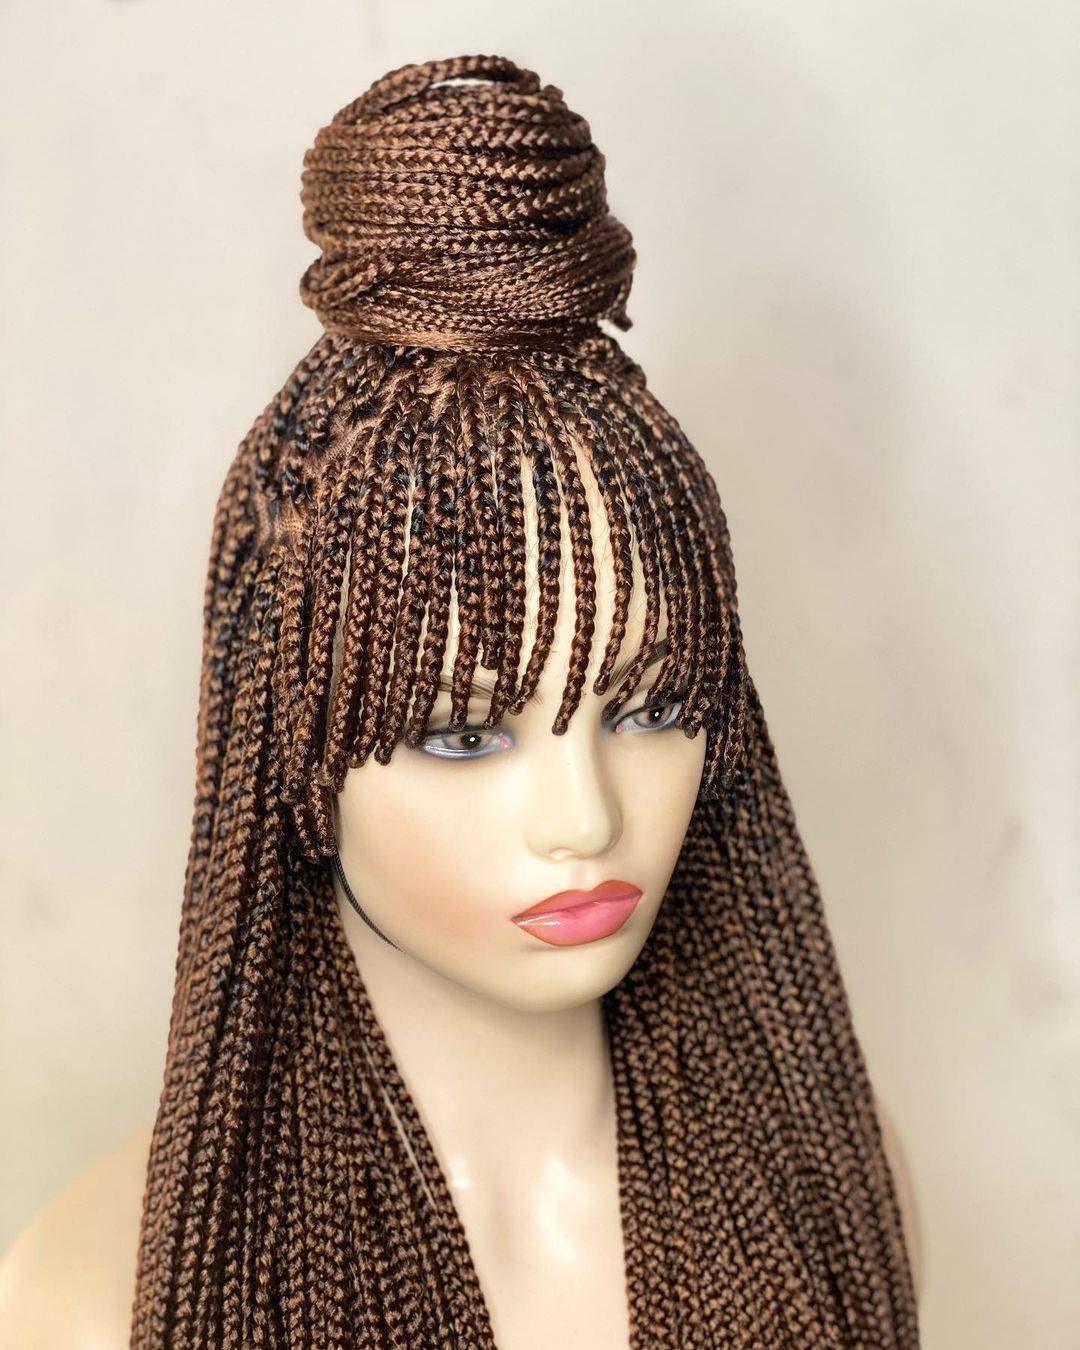 African Box Braid wigs with Bang made on a 13 by 6 Lace Front Wig Color 30, 30 Inches Long